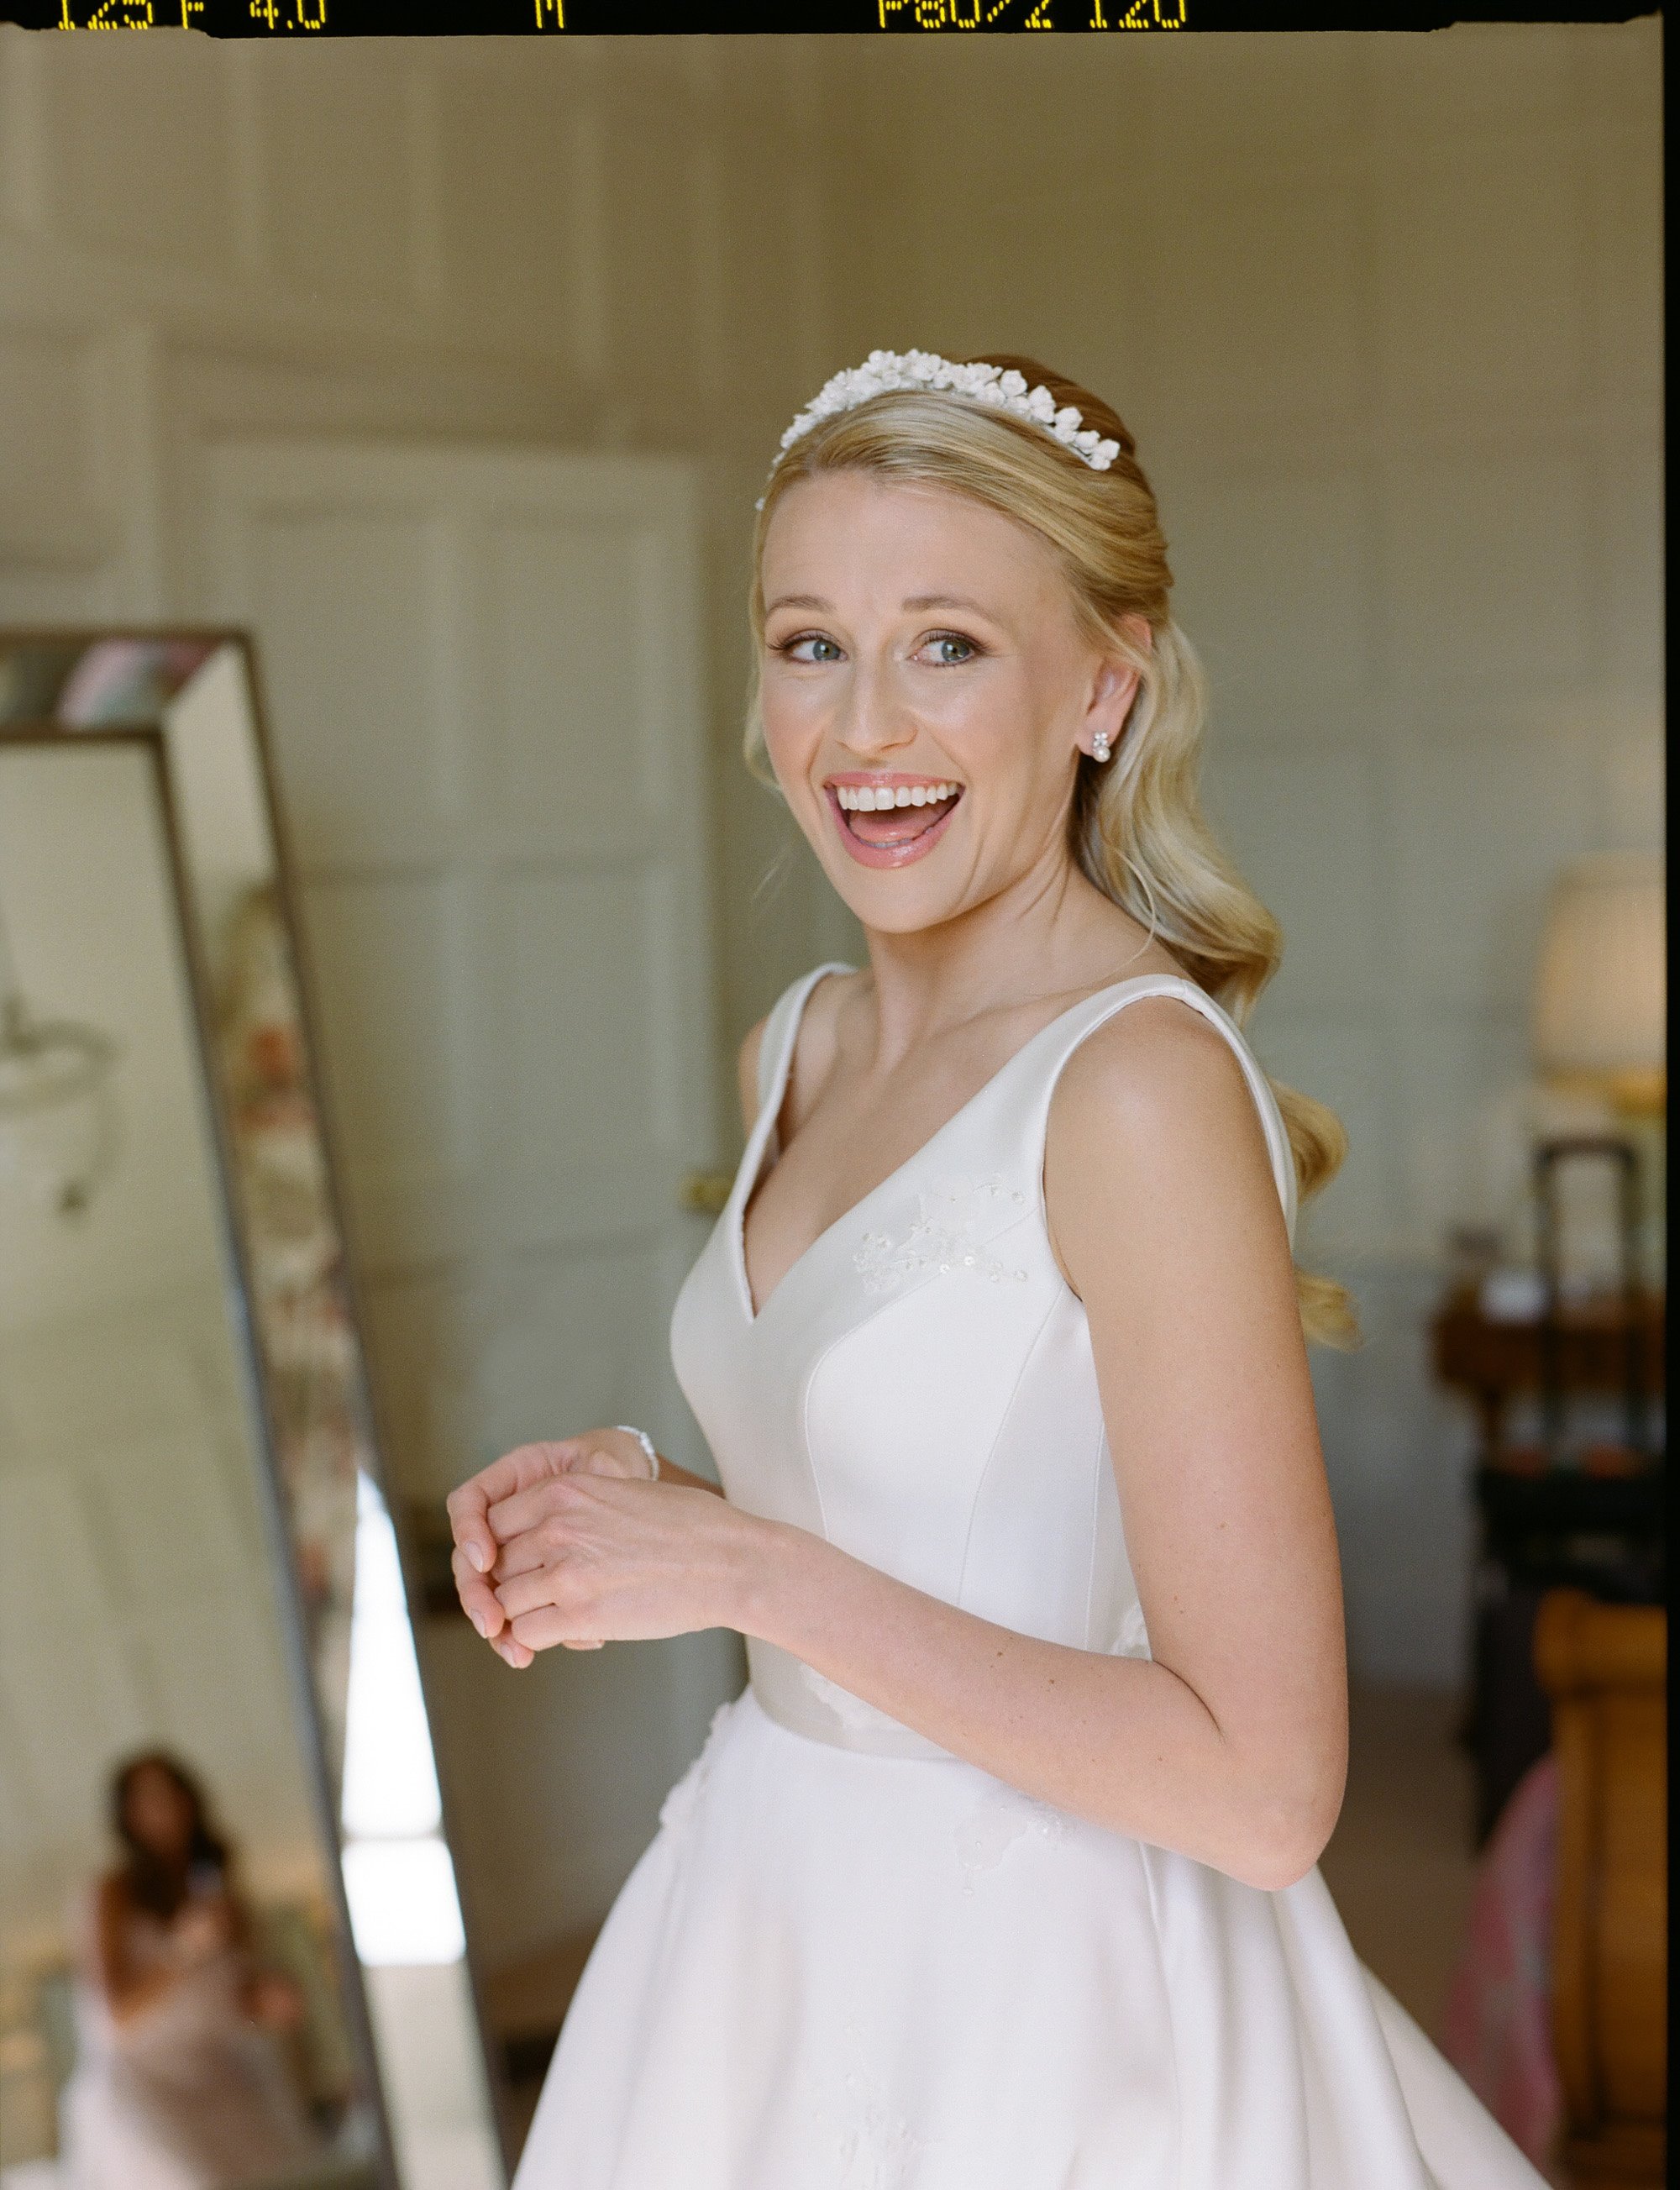 Elegant bride in simple satin dress with full skirt, pearl tiara and pearl earrings smiles on her wedding day at luxury Cotswolds wedding venue Elmore Court